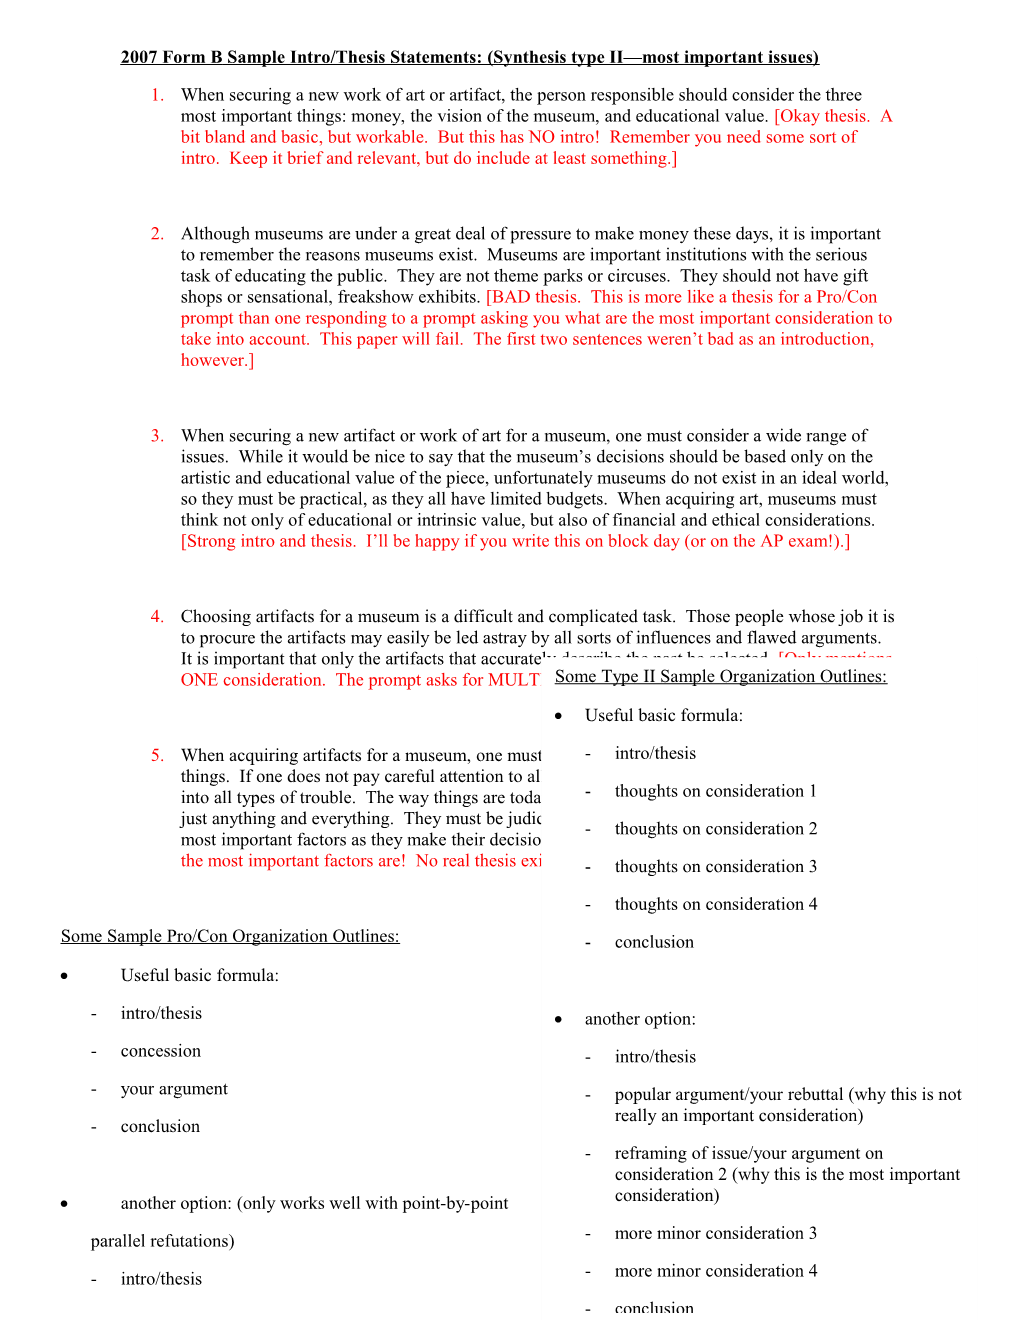 2007 Form Bsample Intro/Thesis Statements: (Synthesis Type II Most Important Issues)